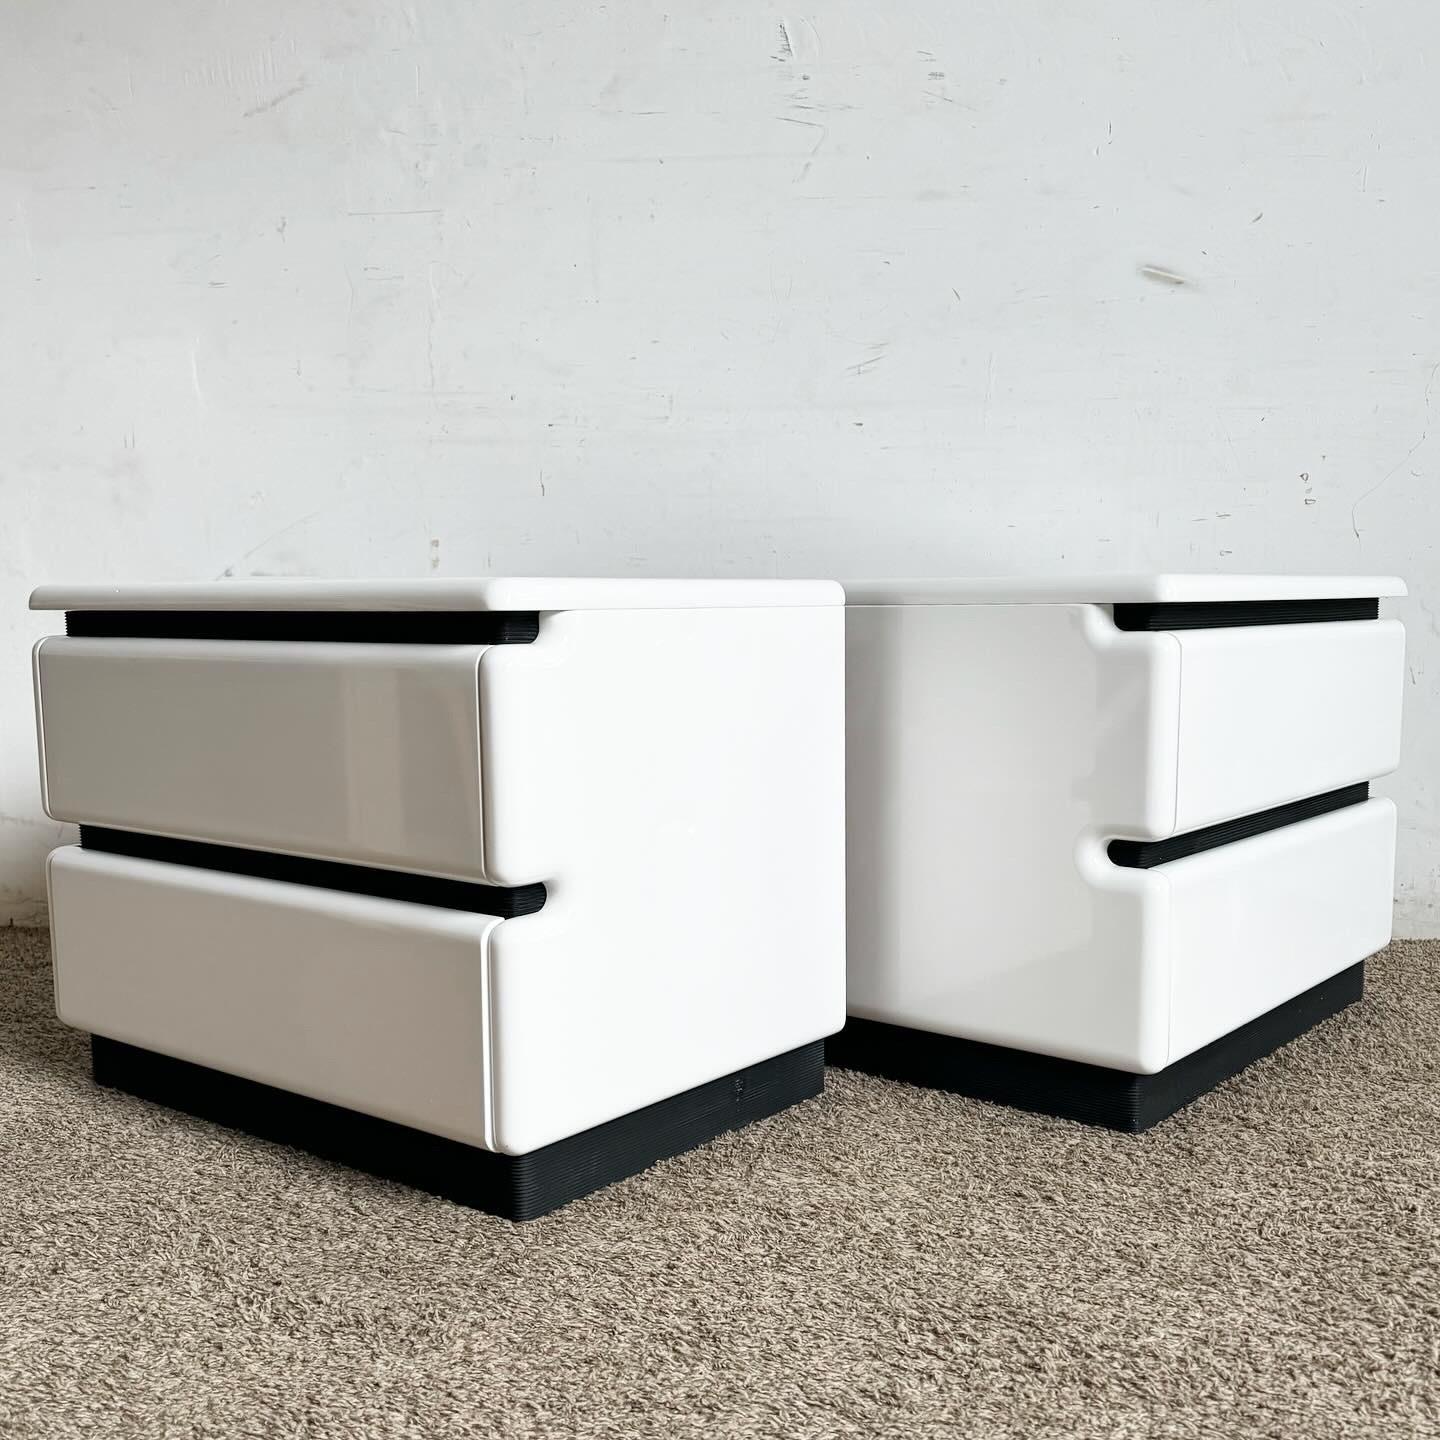 Embrace a futuristic aesthetic with the Storm Trooper Themed Nightstands by Reuben‚Äôs. These postmodern pieces feature a striking white lacquer finish with bold black accents, perfect for modern bedrooms. Offering ample storage and a sleek design,